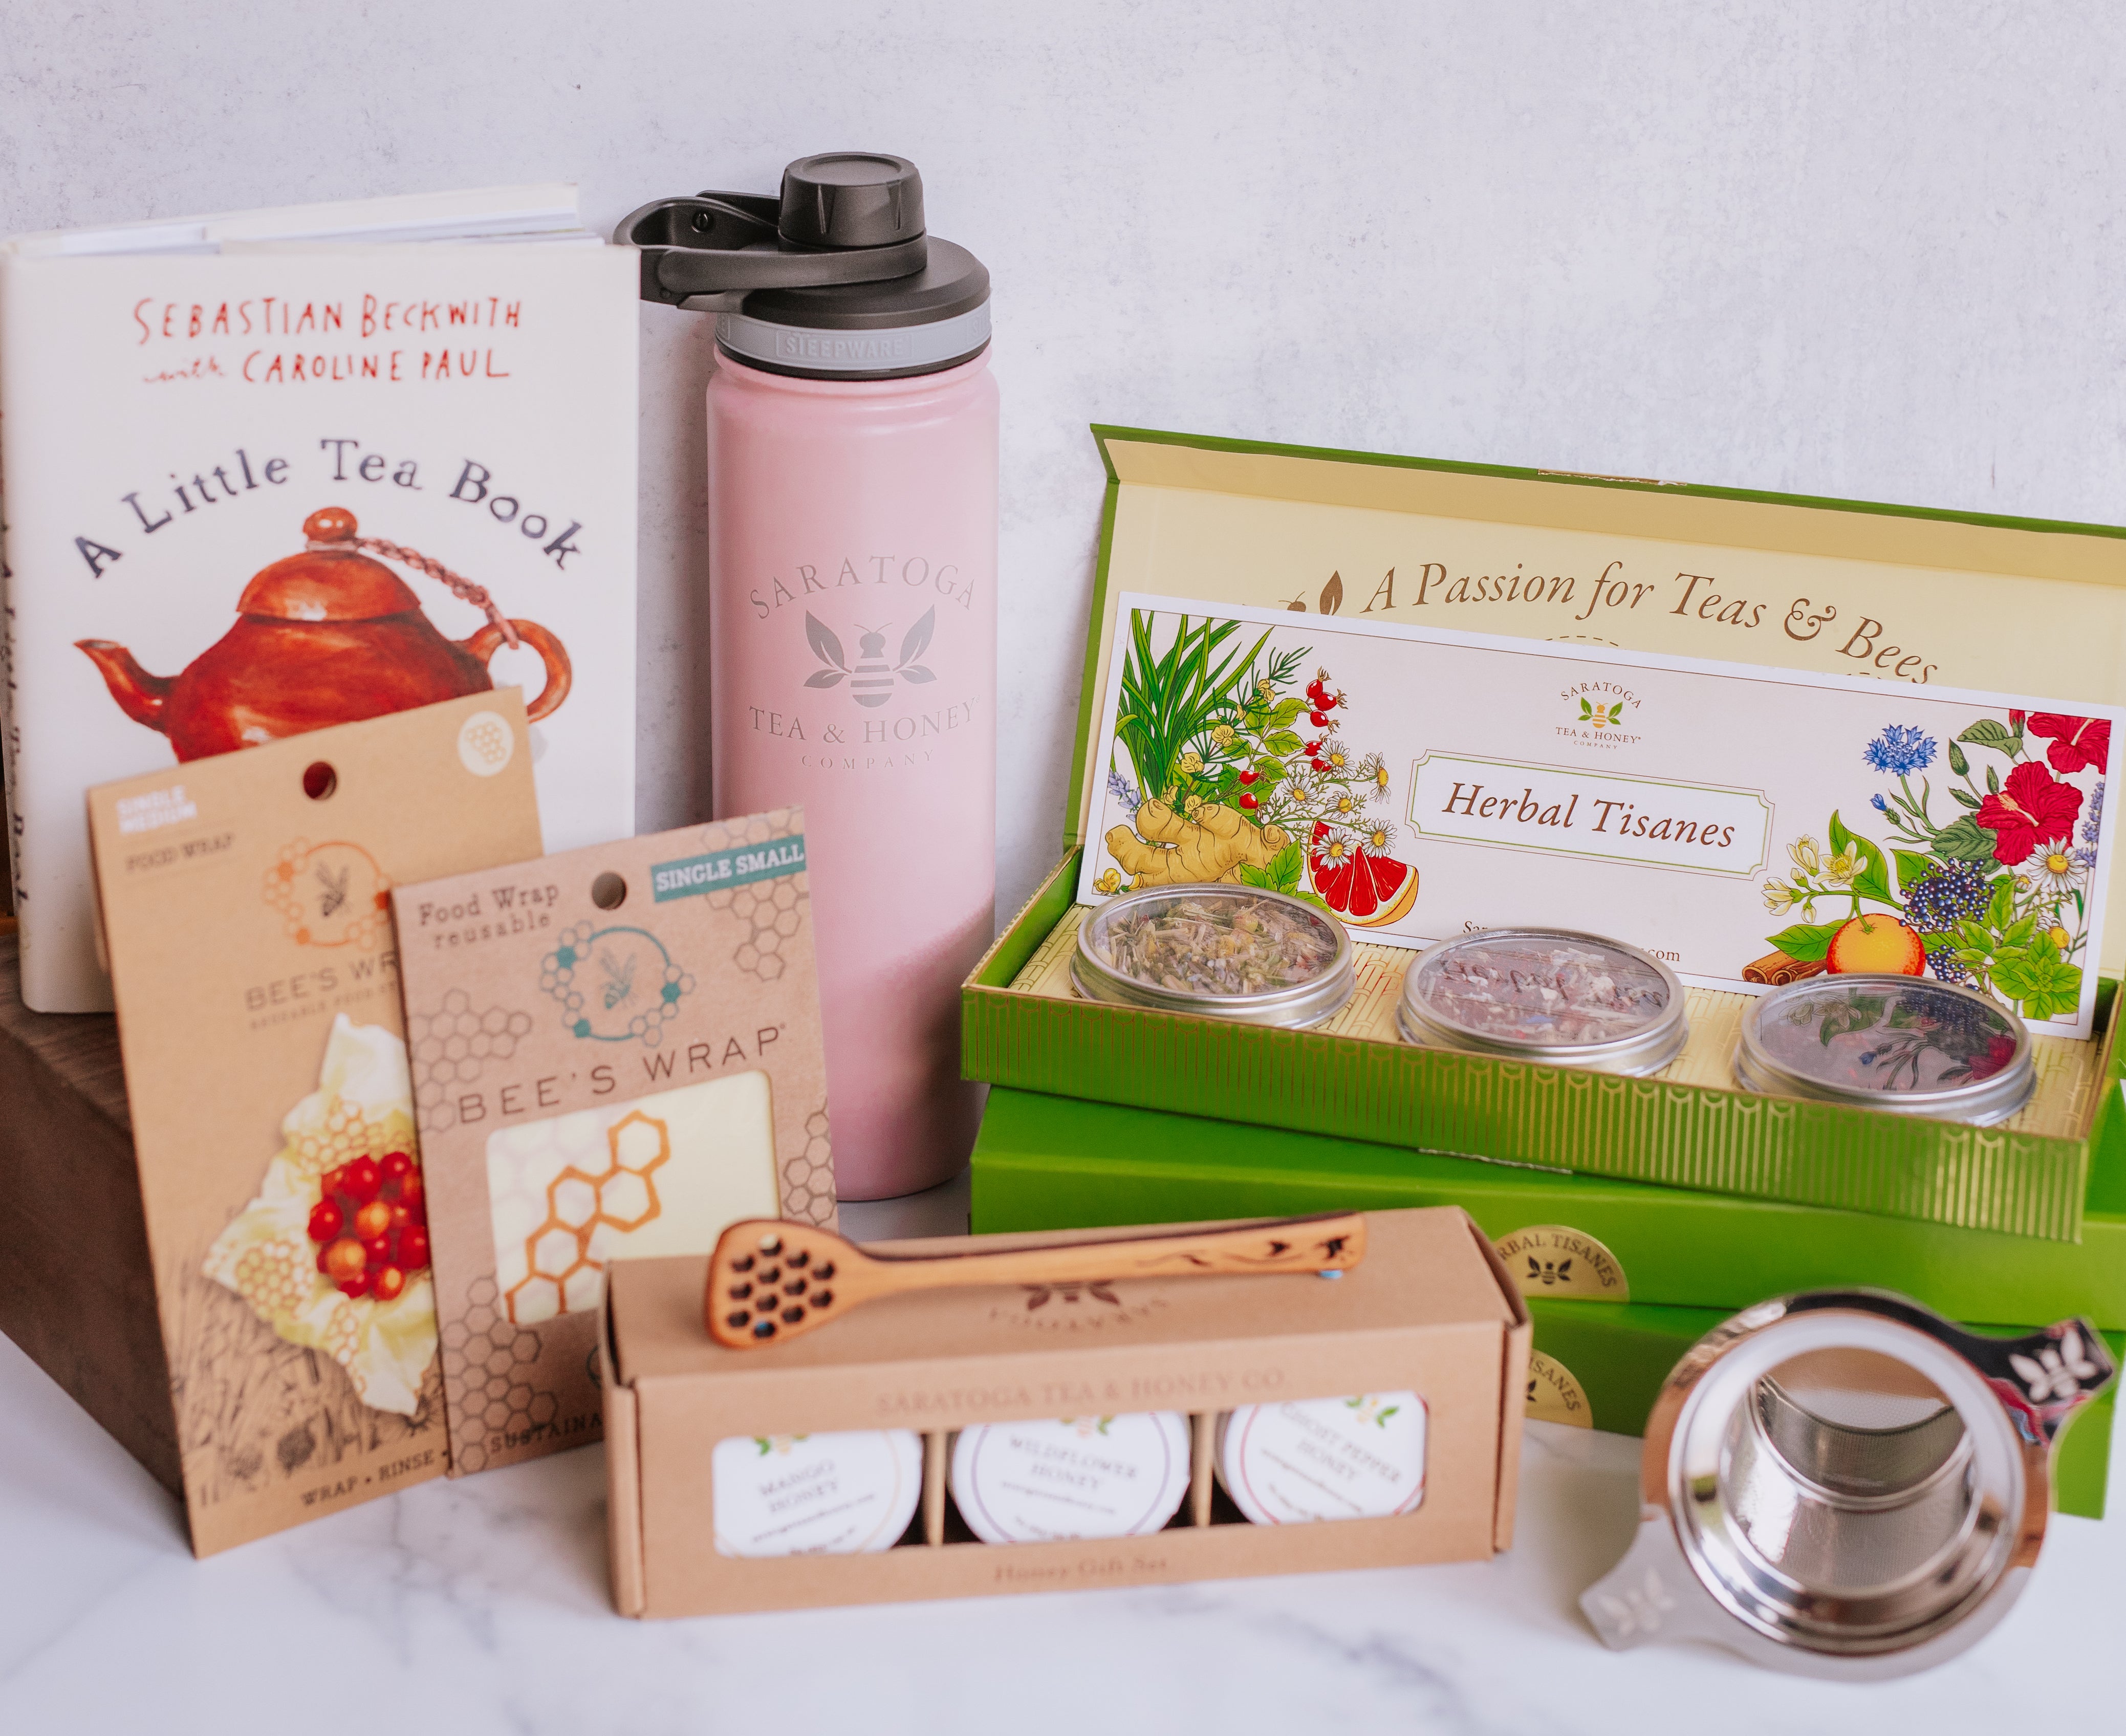 collection of tea and honey gifts from saratoga tea and honey co including a little tea book, tea tumbler, bees wrap, tea sample sets, honey sample sets, and accessories